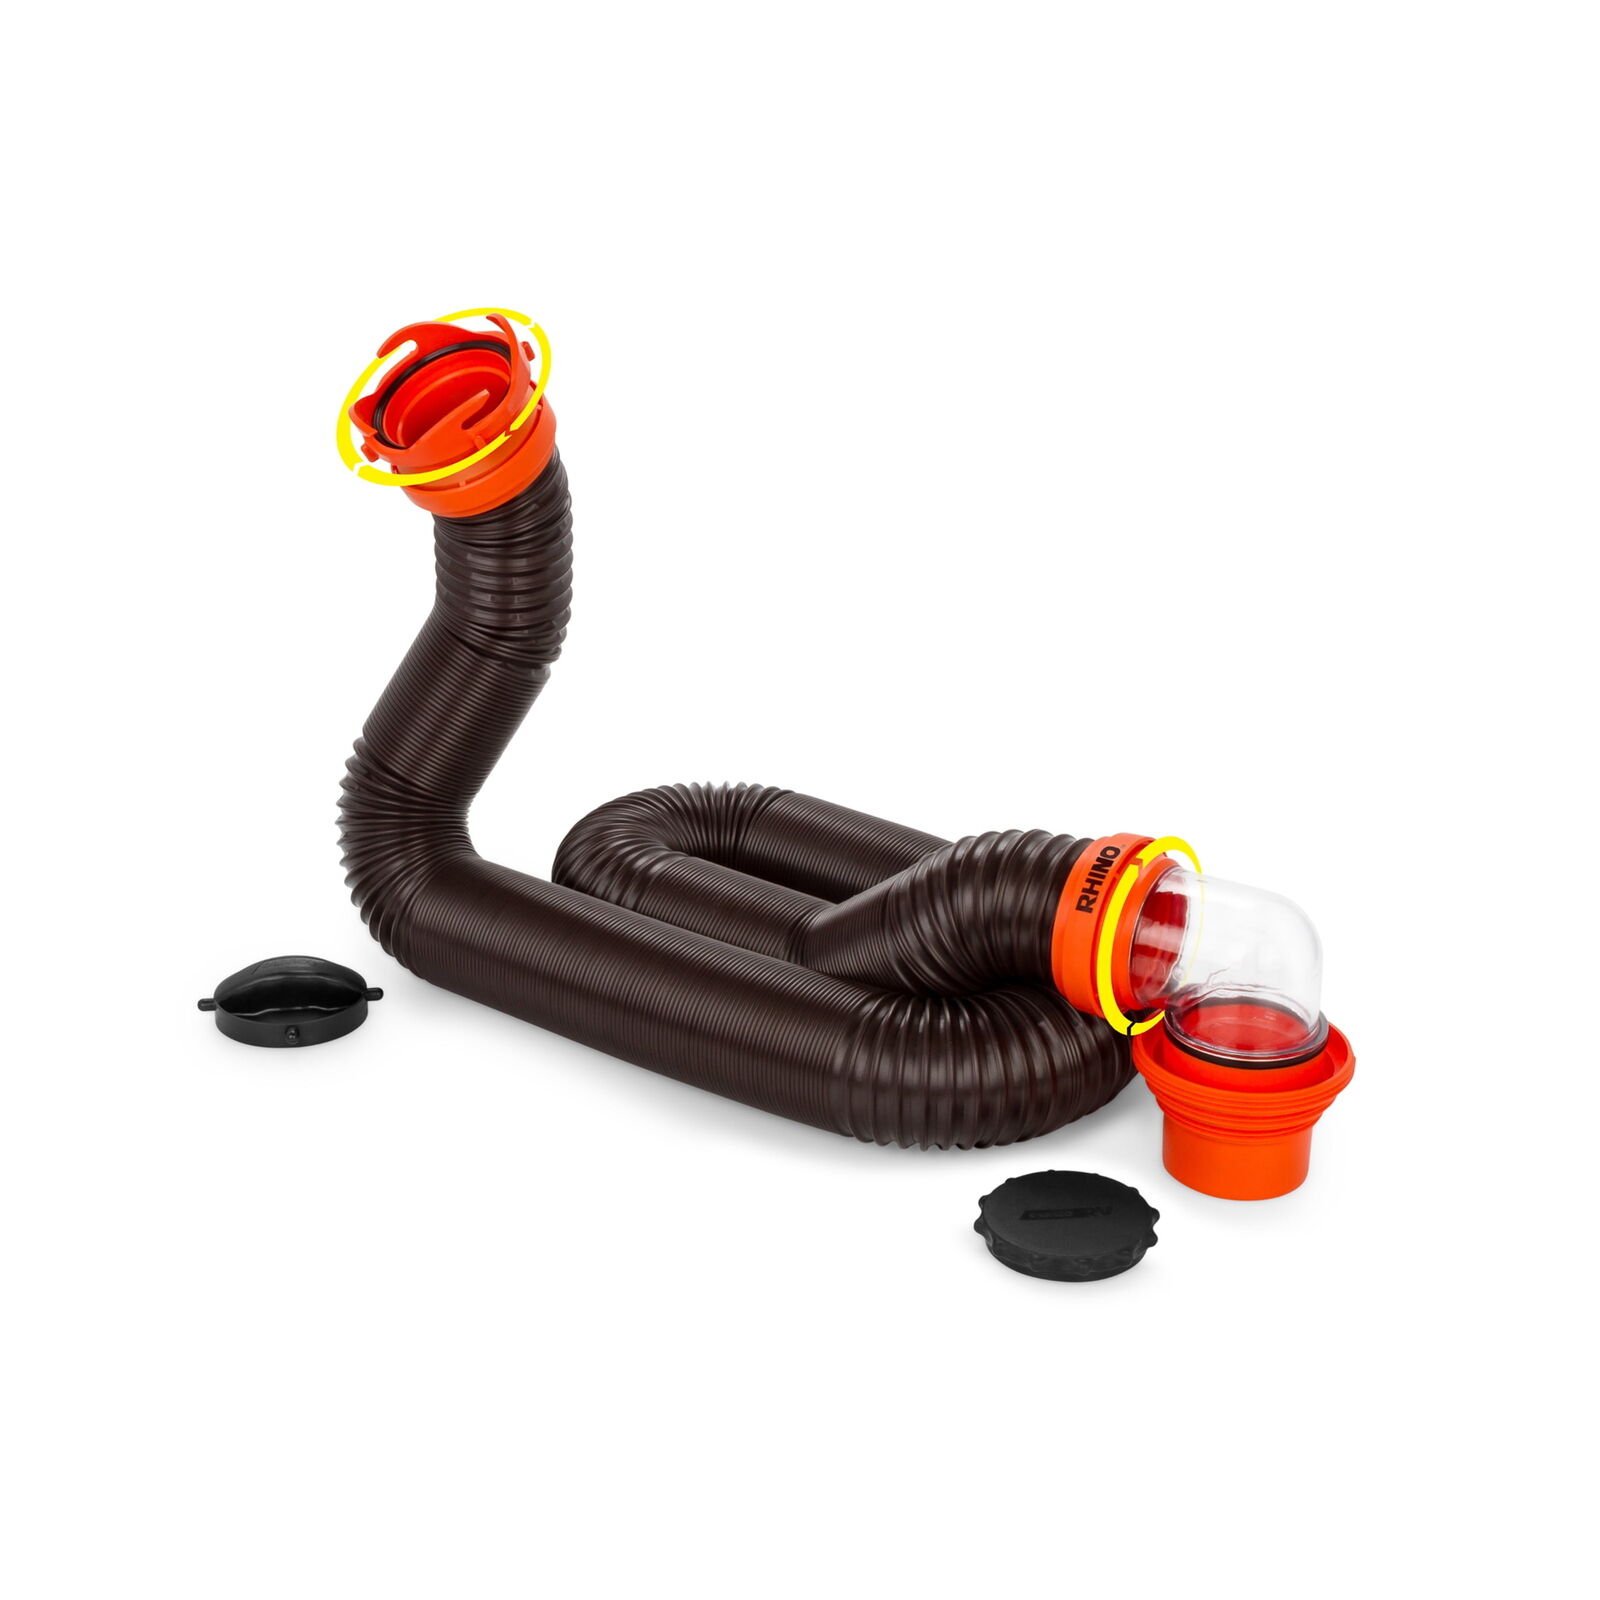 Camper/RV Sewer Hose Kit with 15\' Hose and Swivel Fittings